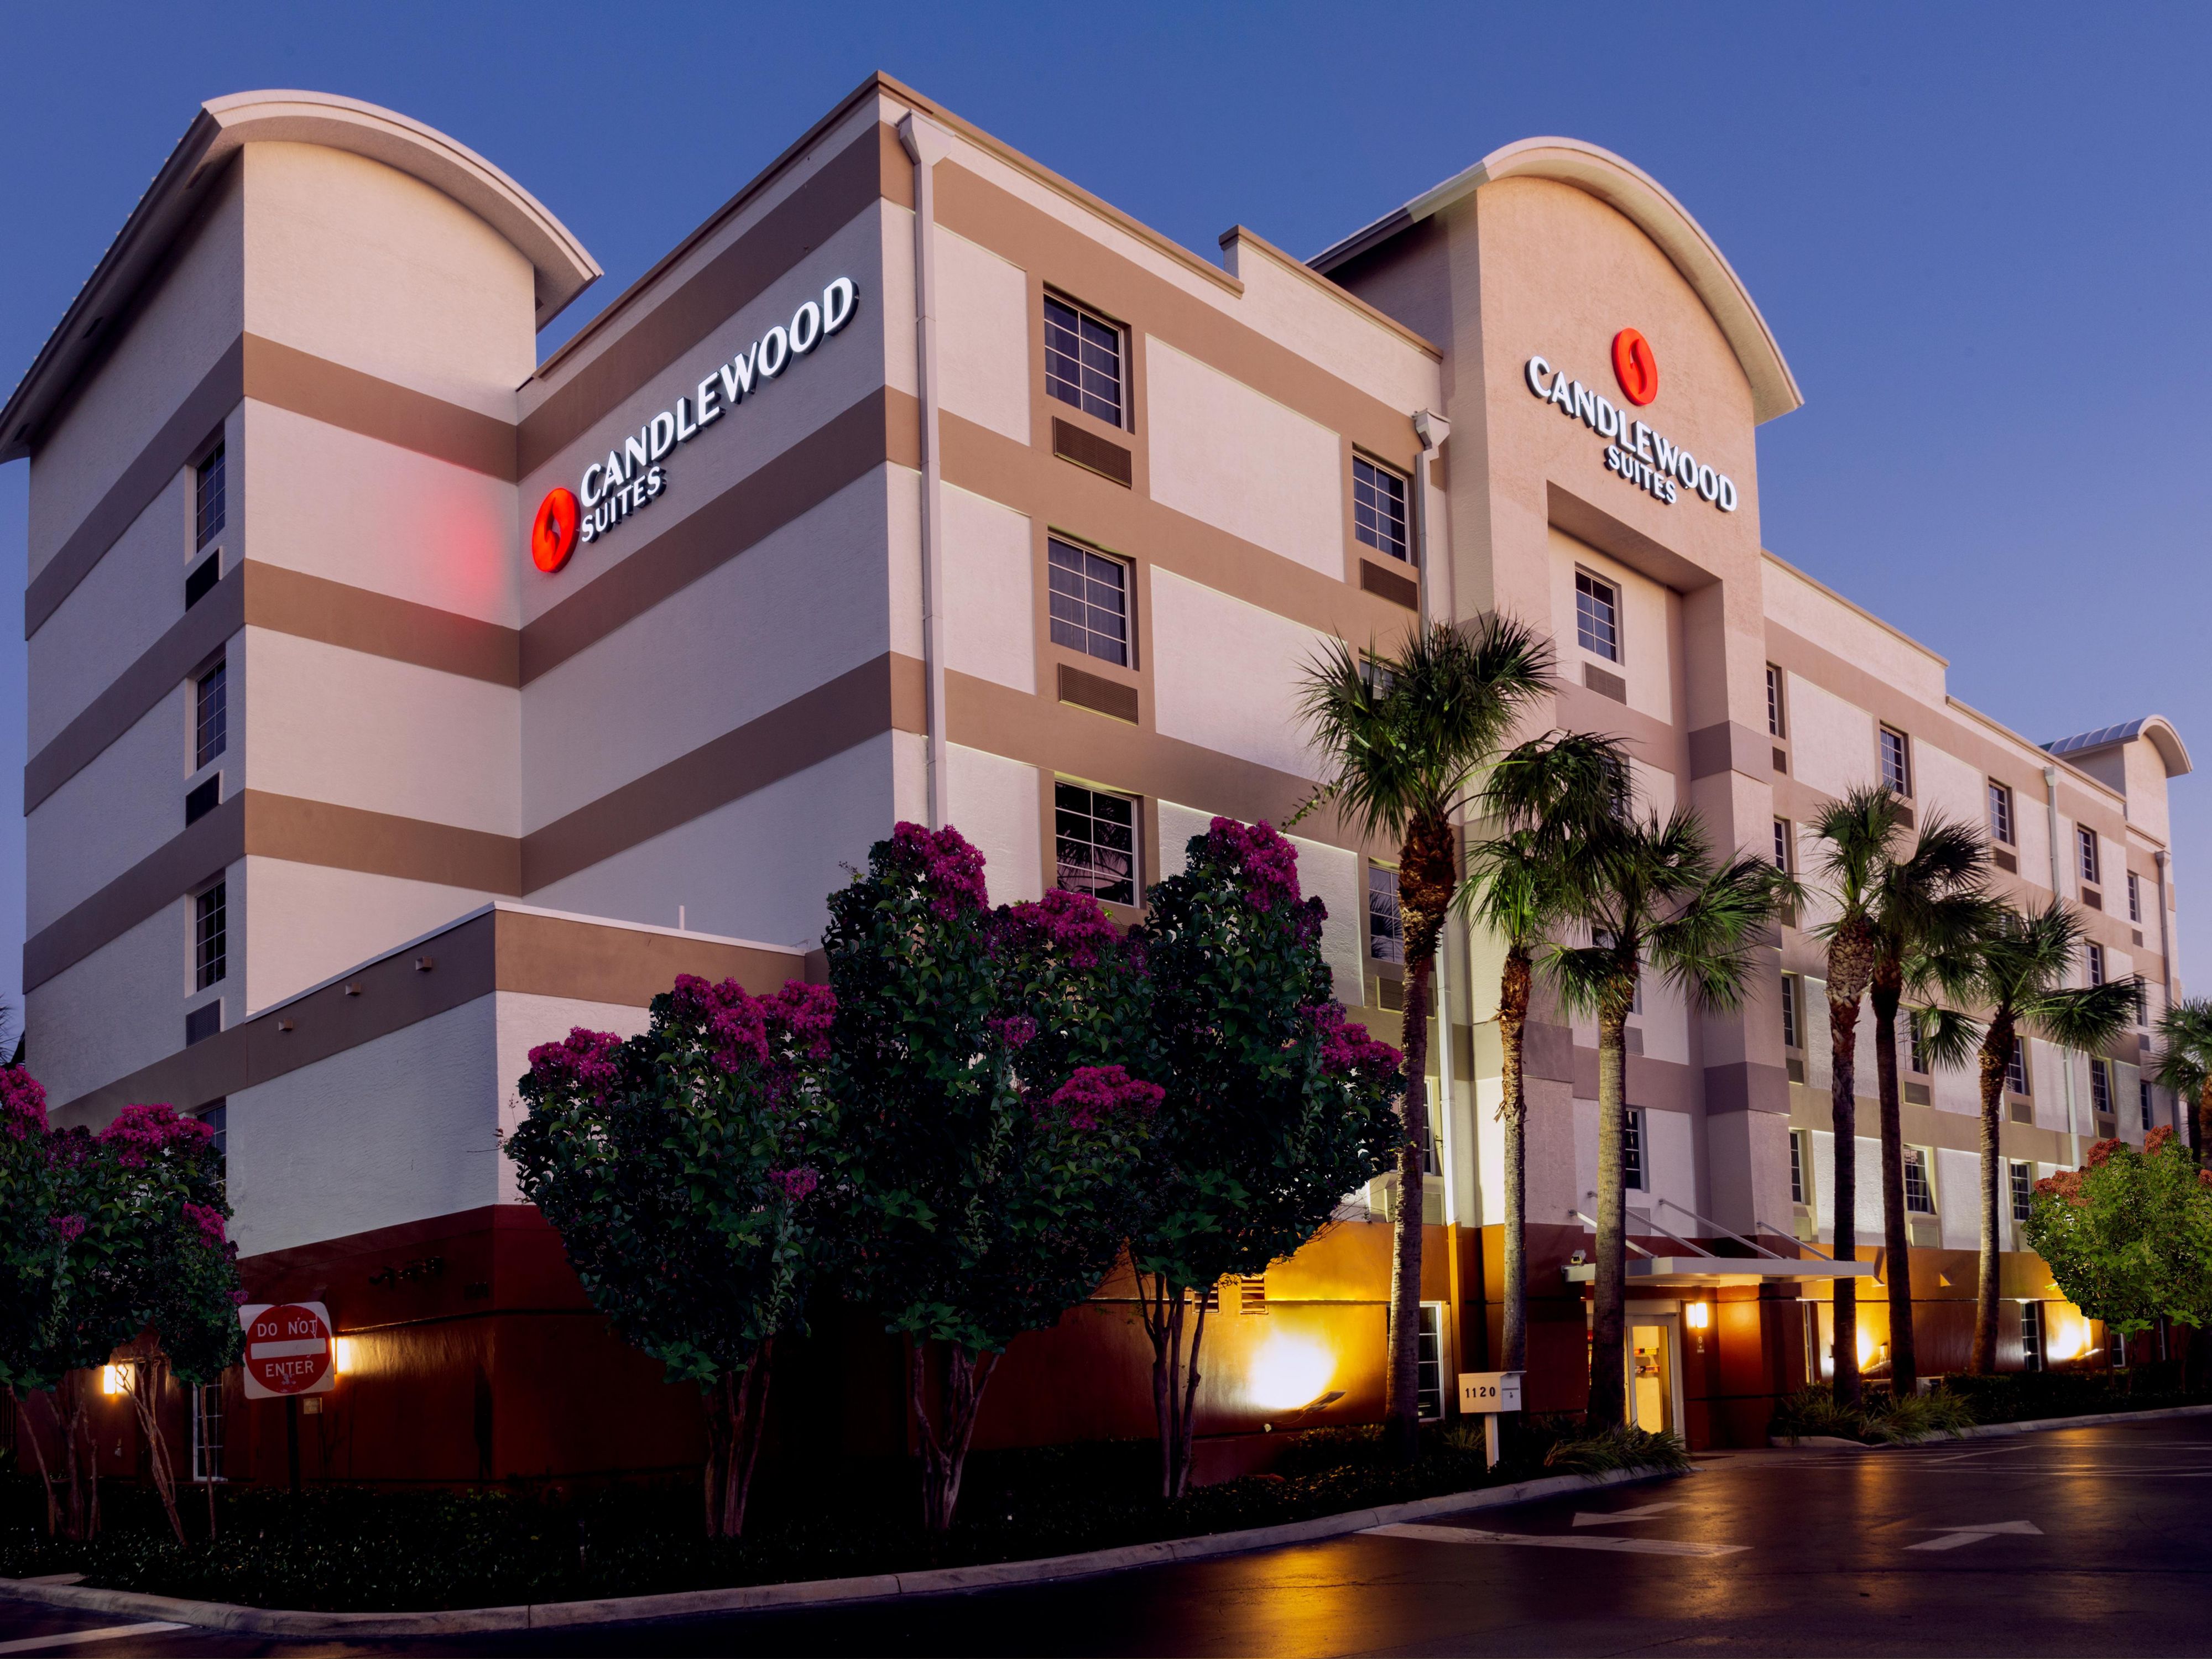 Candlewood Suites Fort Lauderdale 6407235580 4x3